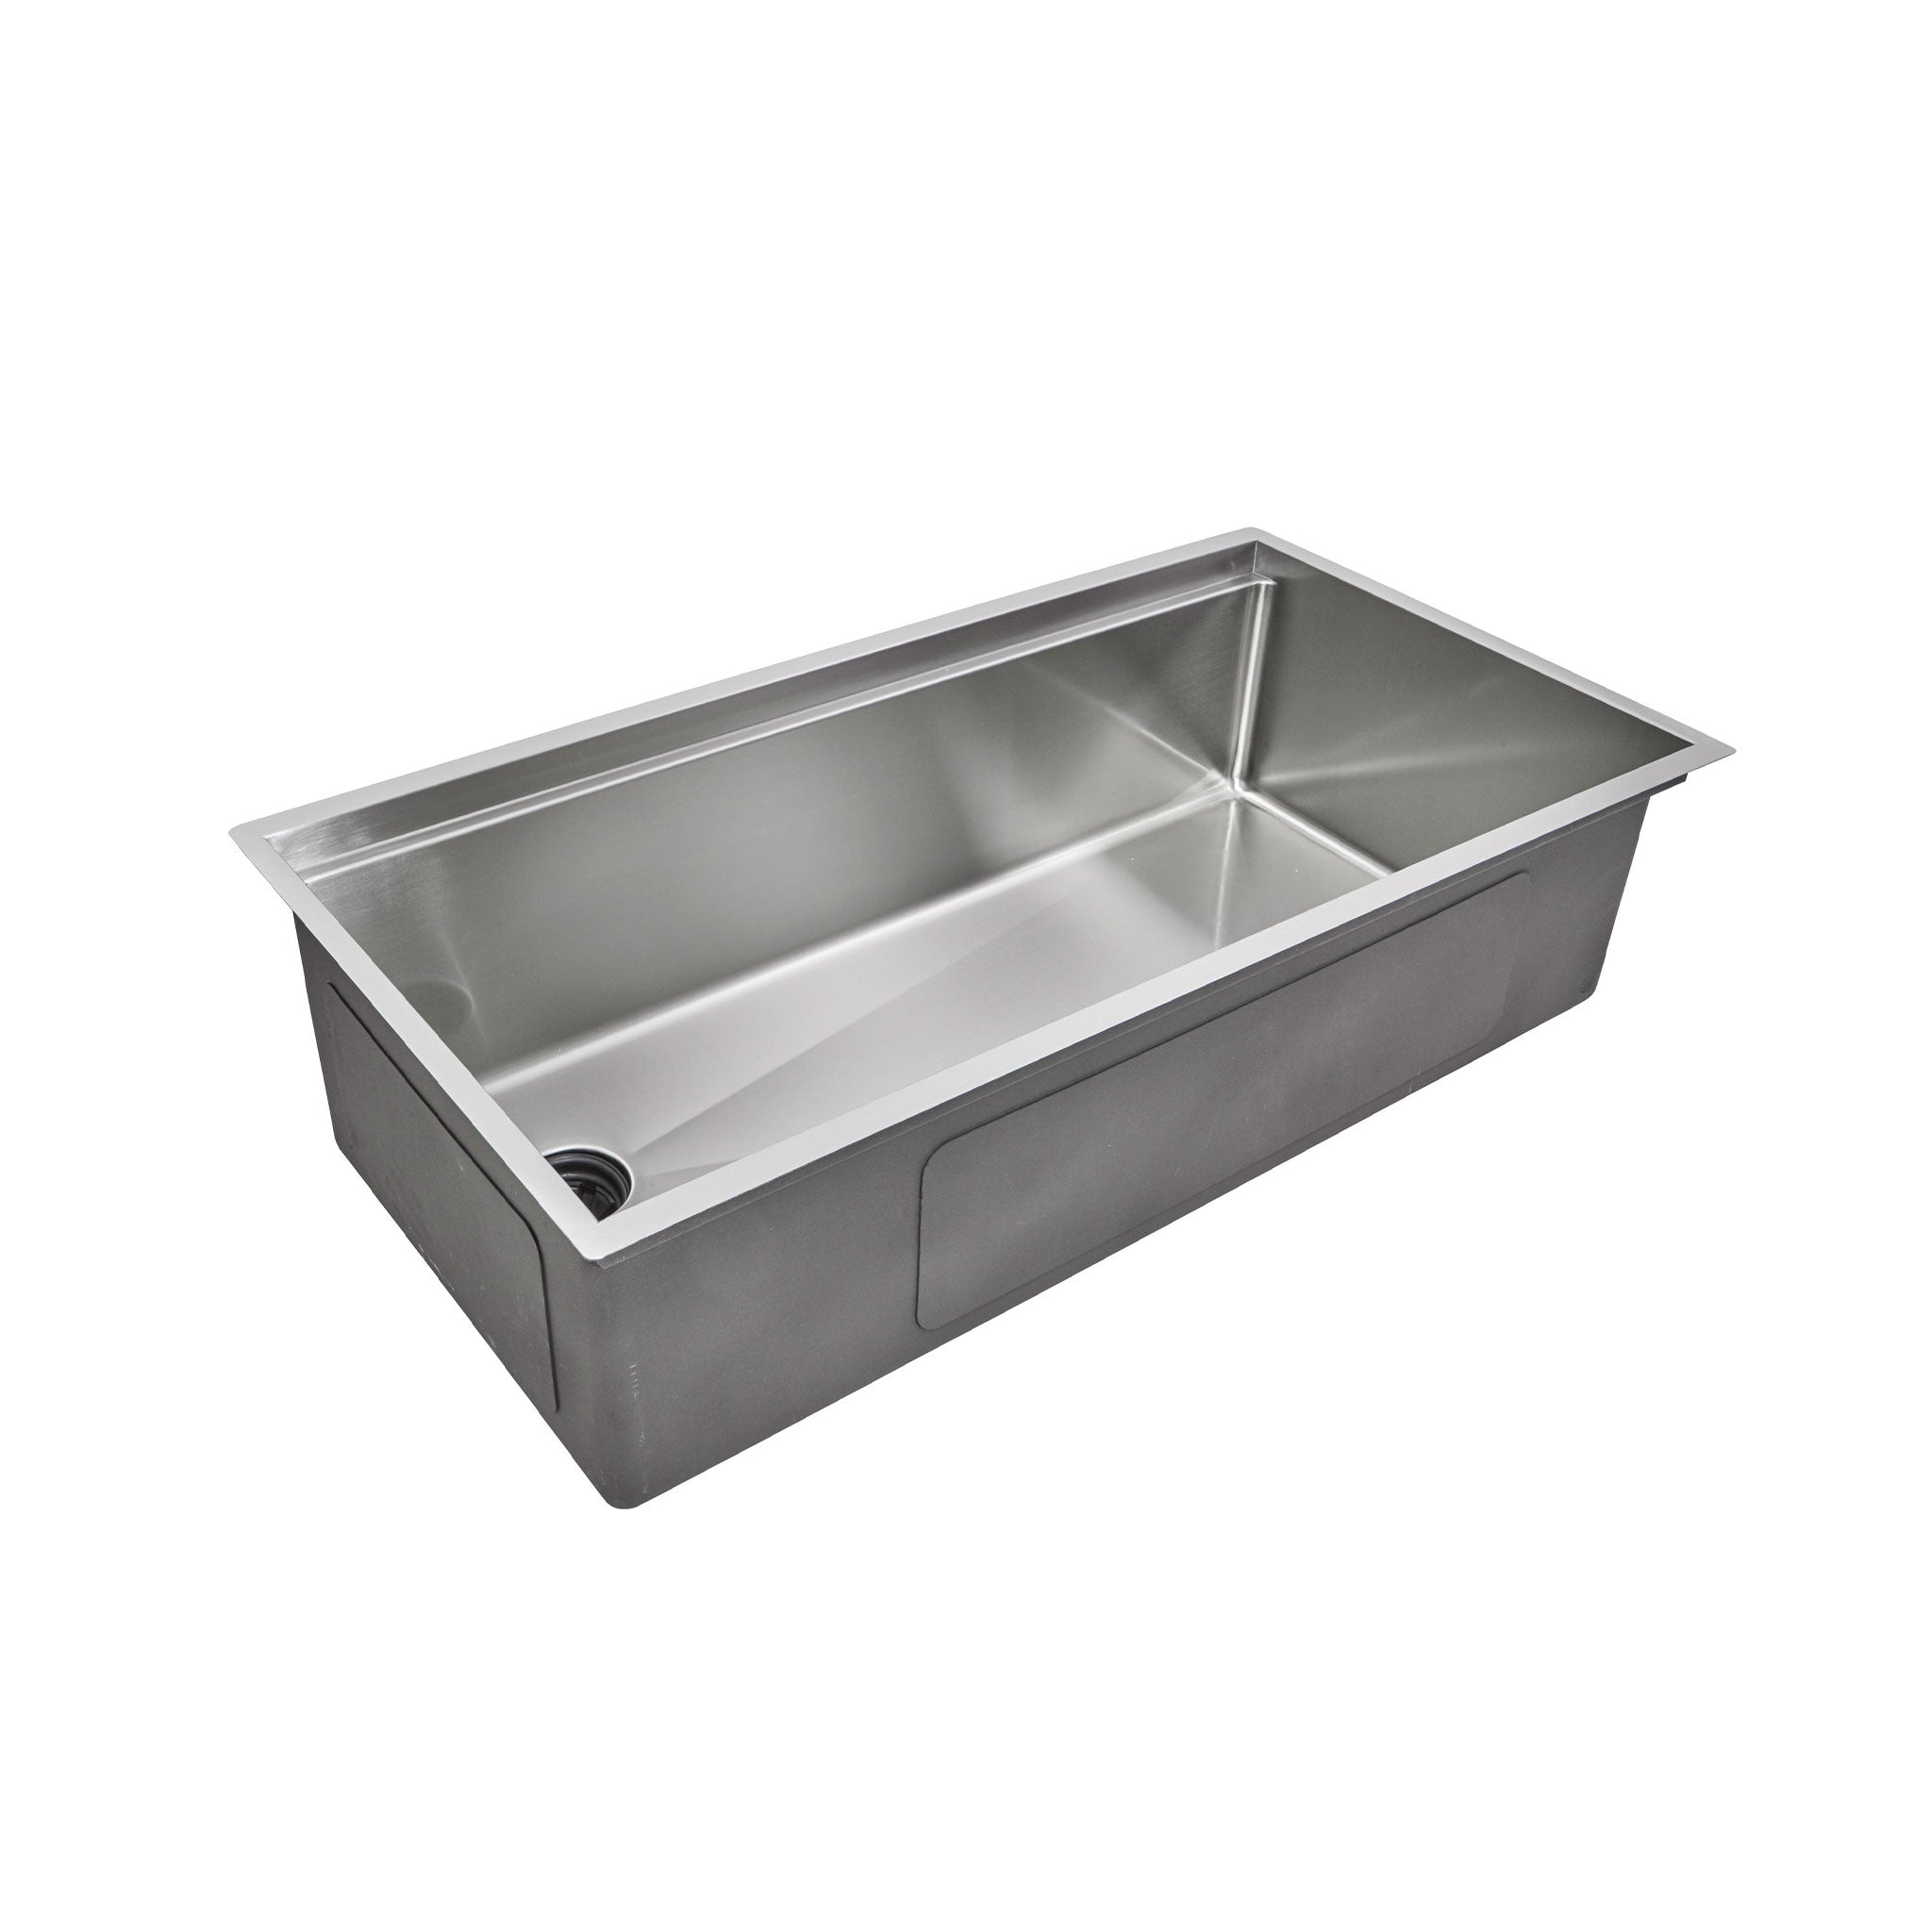 Create Good Sinks 37" stainless steel undermount workstation sink with offset drain on the left